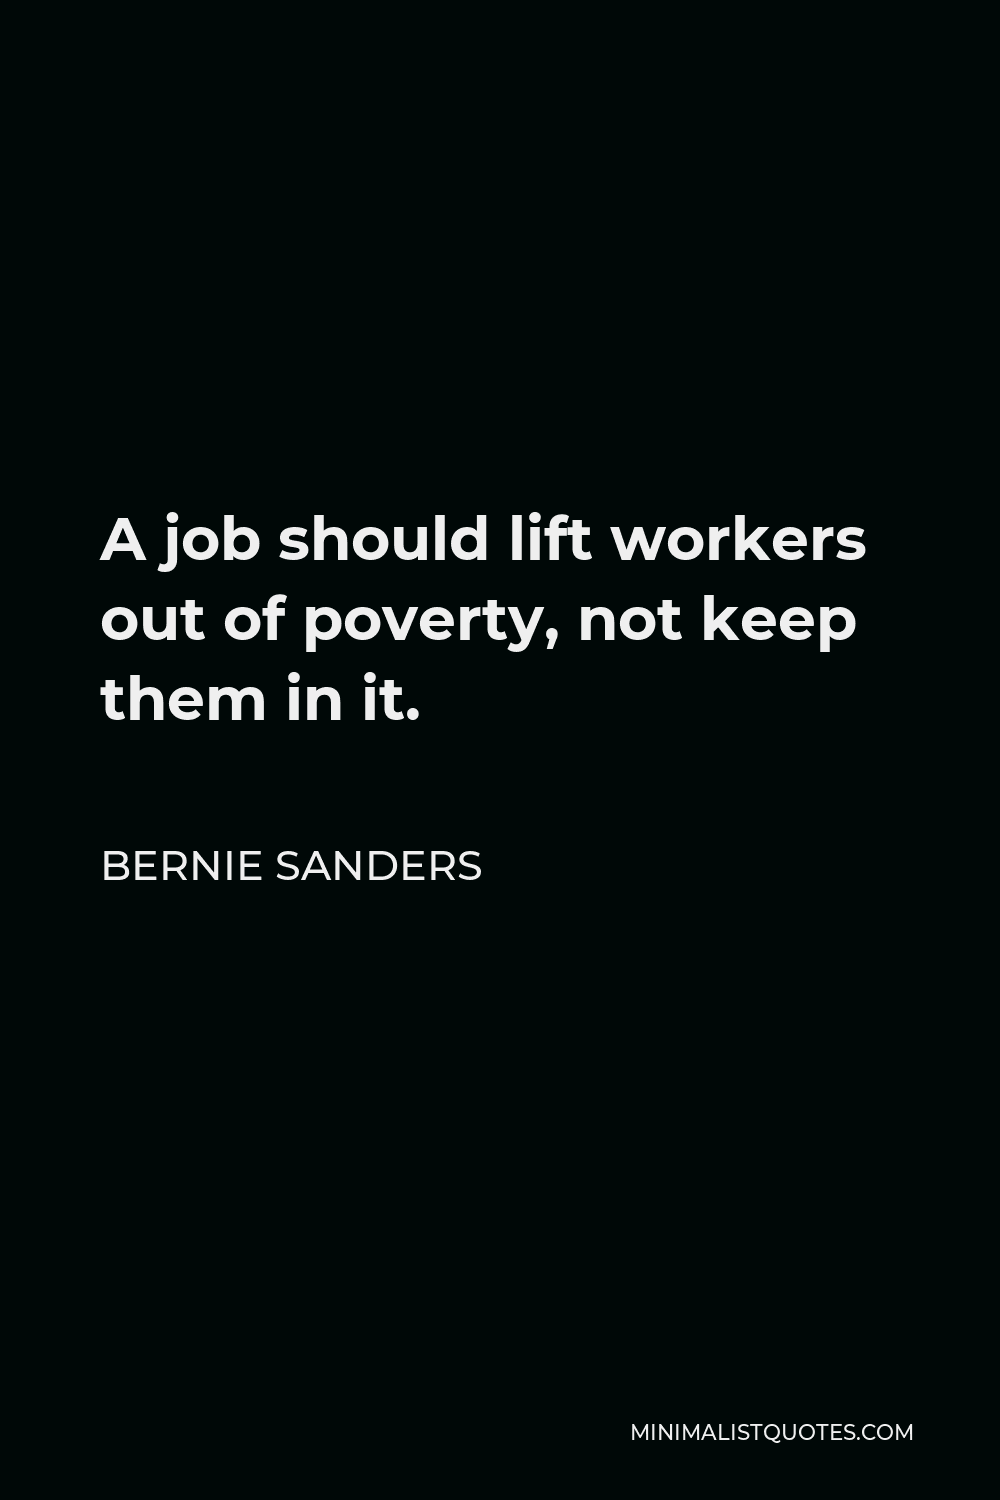 Bernie Sanders Quote - A job should lift workers out of poverty, not keep them in it.